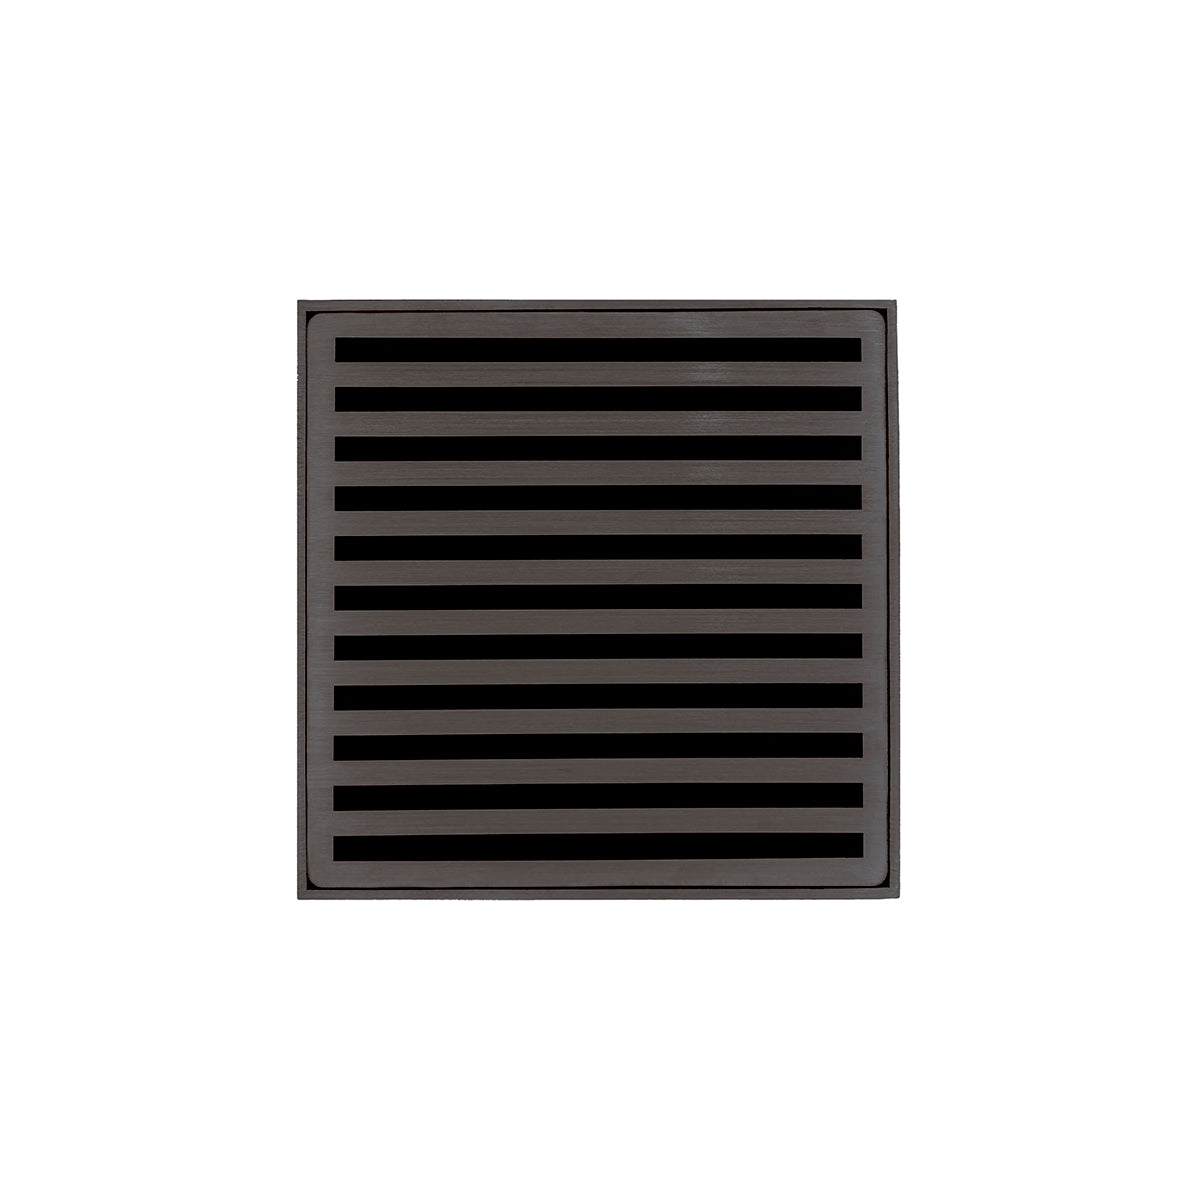 Infinity Drain 5" x 5" ND 5 Premium Center Drain Kit with Lines Pattern Decorative Plate with Cast Iron Drain Body, 2" Outlet